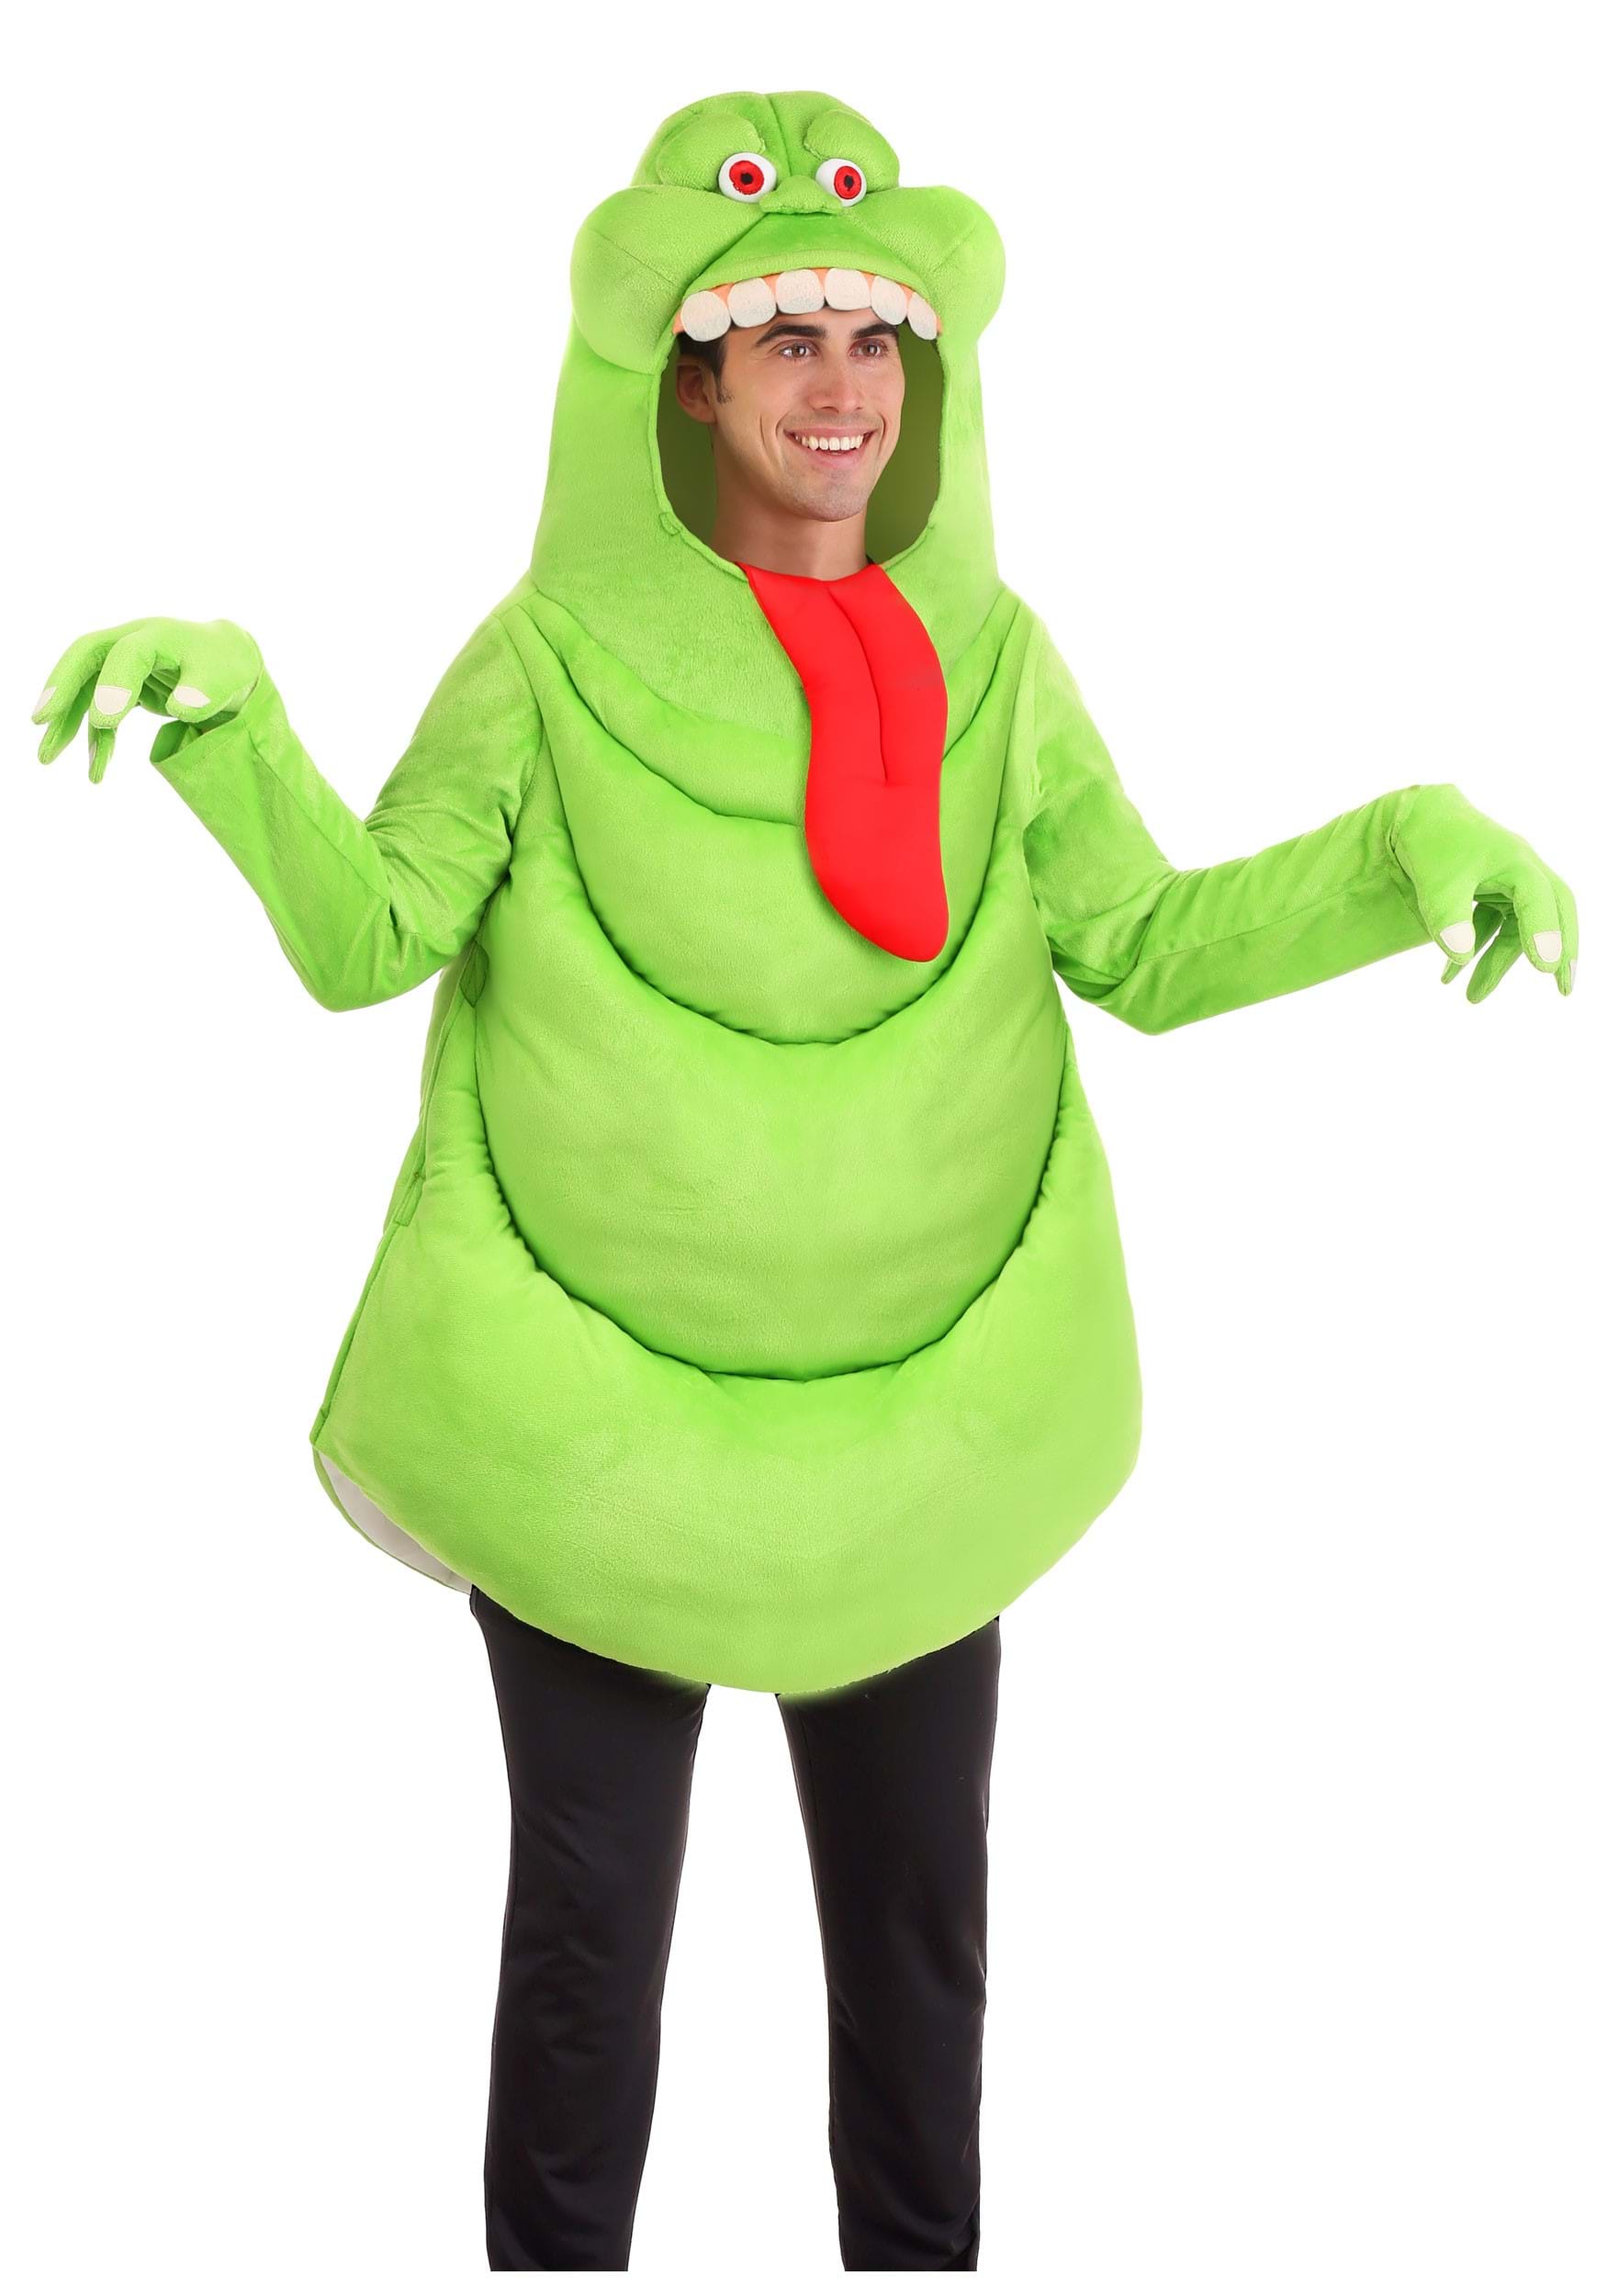 Photos - Fancy Dress Ghostbusters FUN Costumes Adult  Slimer Costume |  Costumes Gre 